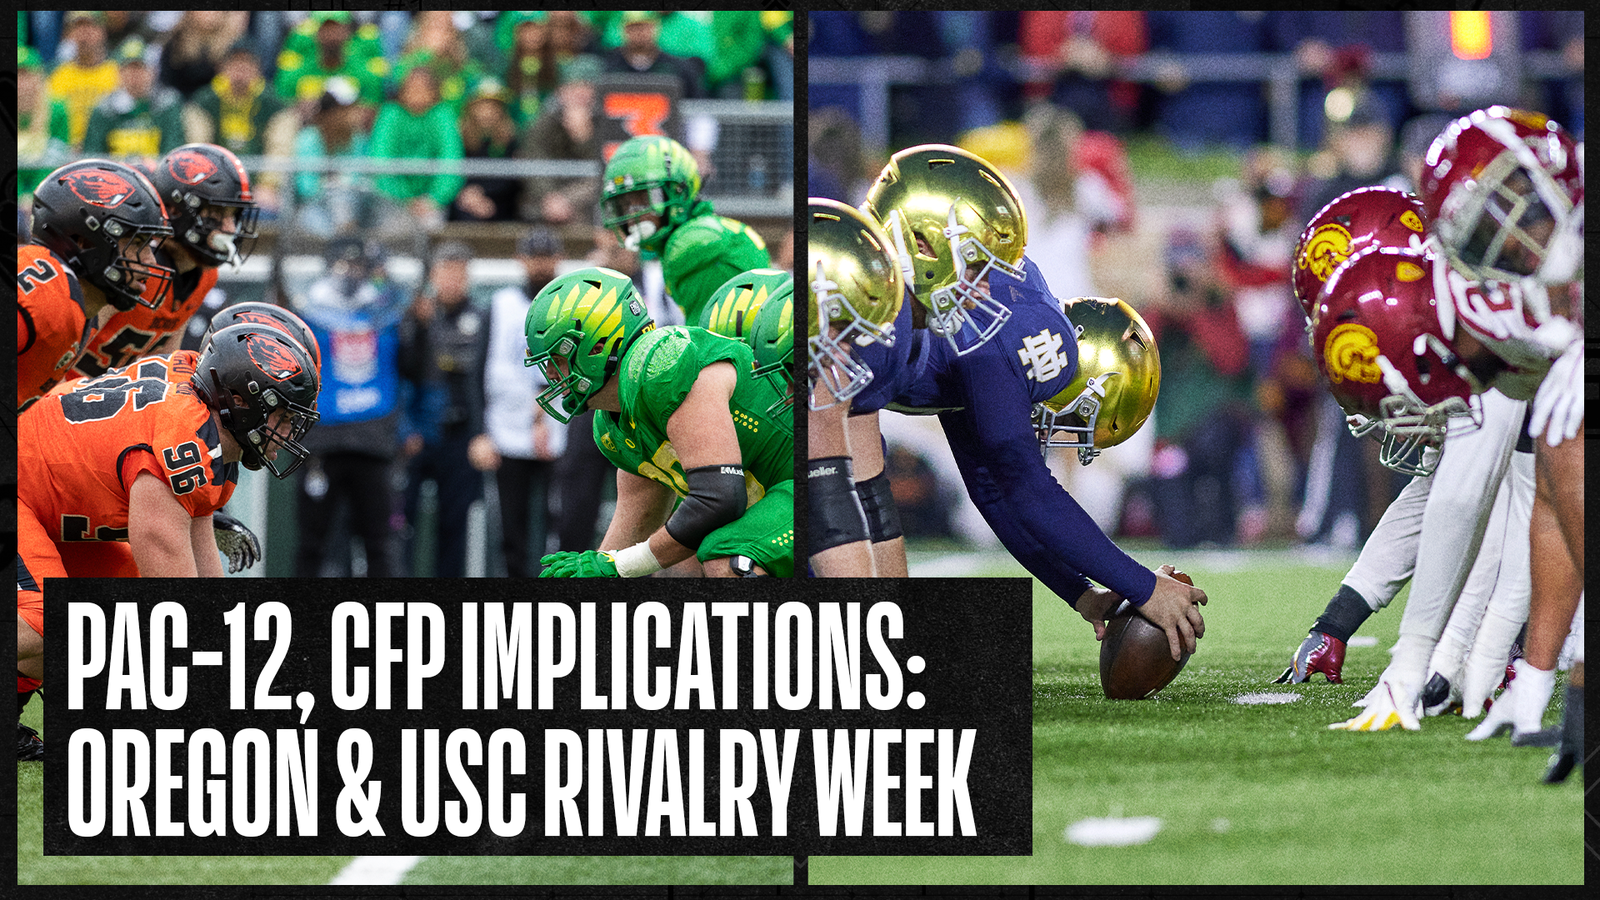 Previewing Notre Dame-USC and more